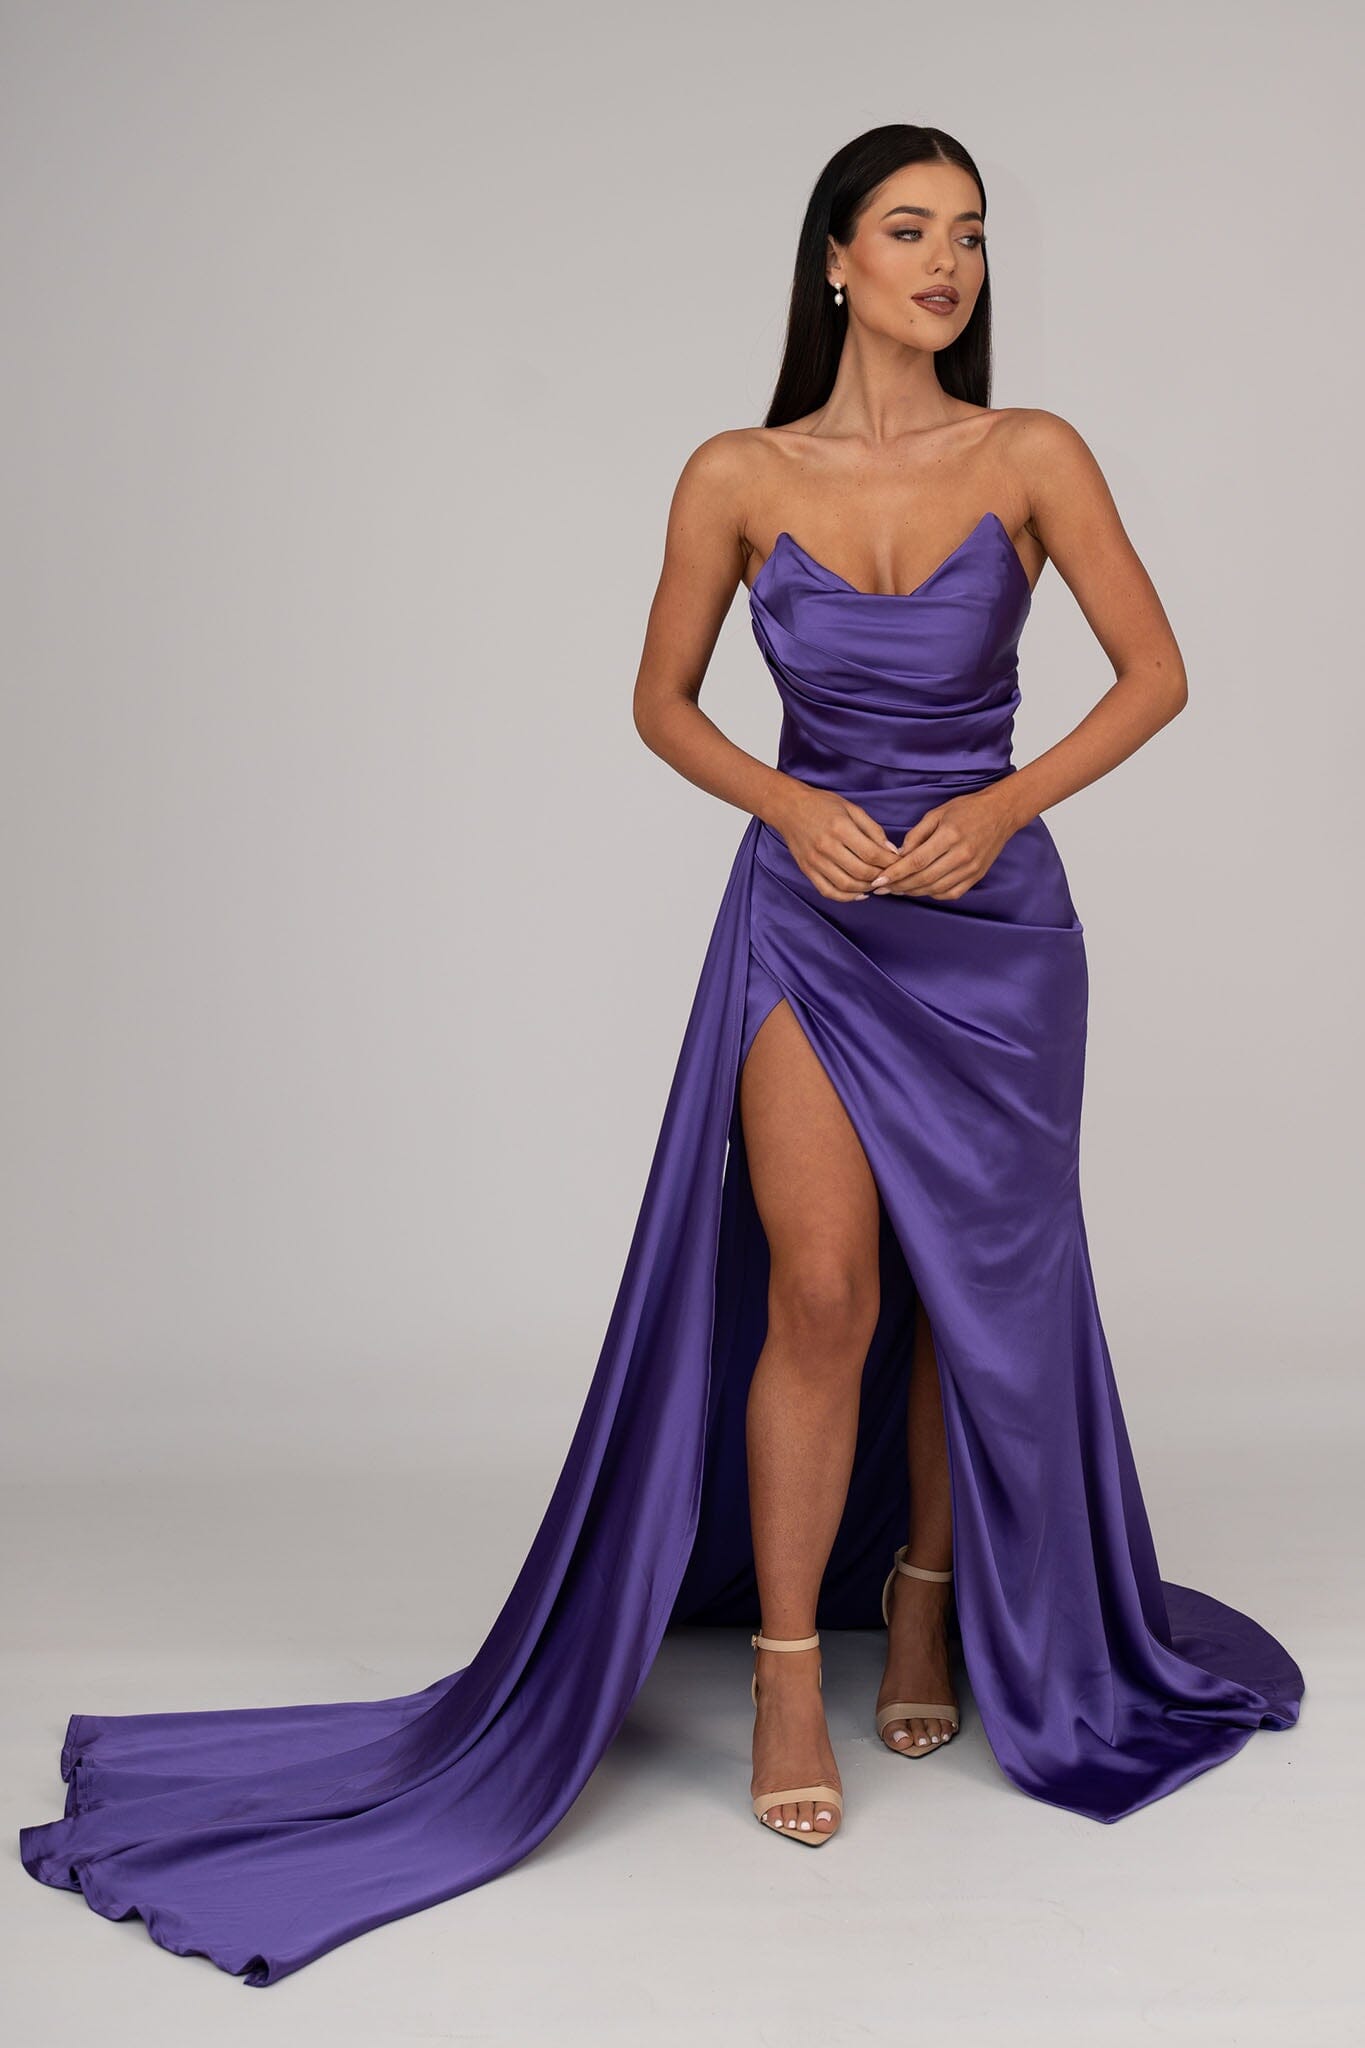 Pooja Peshoria Satin Embellished Gown | Purple, Swarovski Crystals, Satin,  Boat Neck, Full Sleeves | Embellished gown, Gowns, Aza fashion